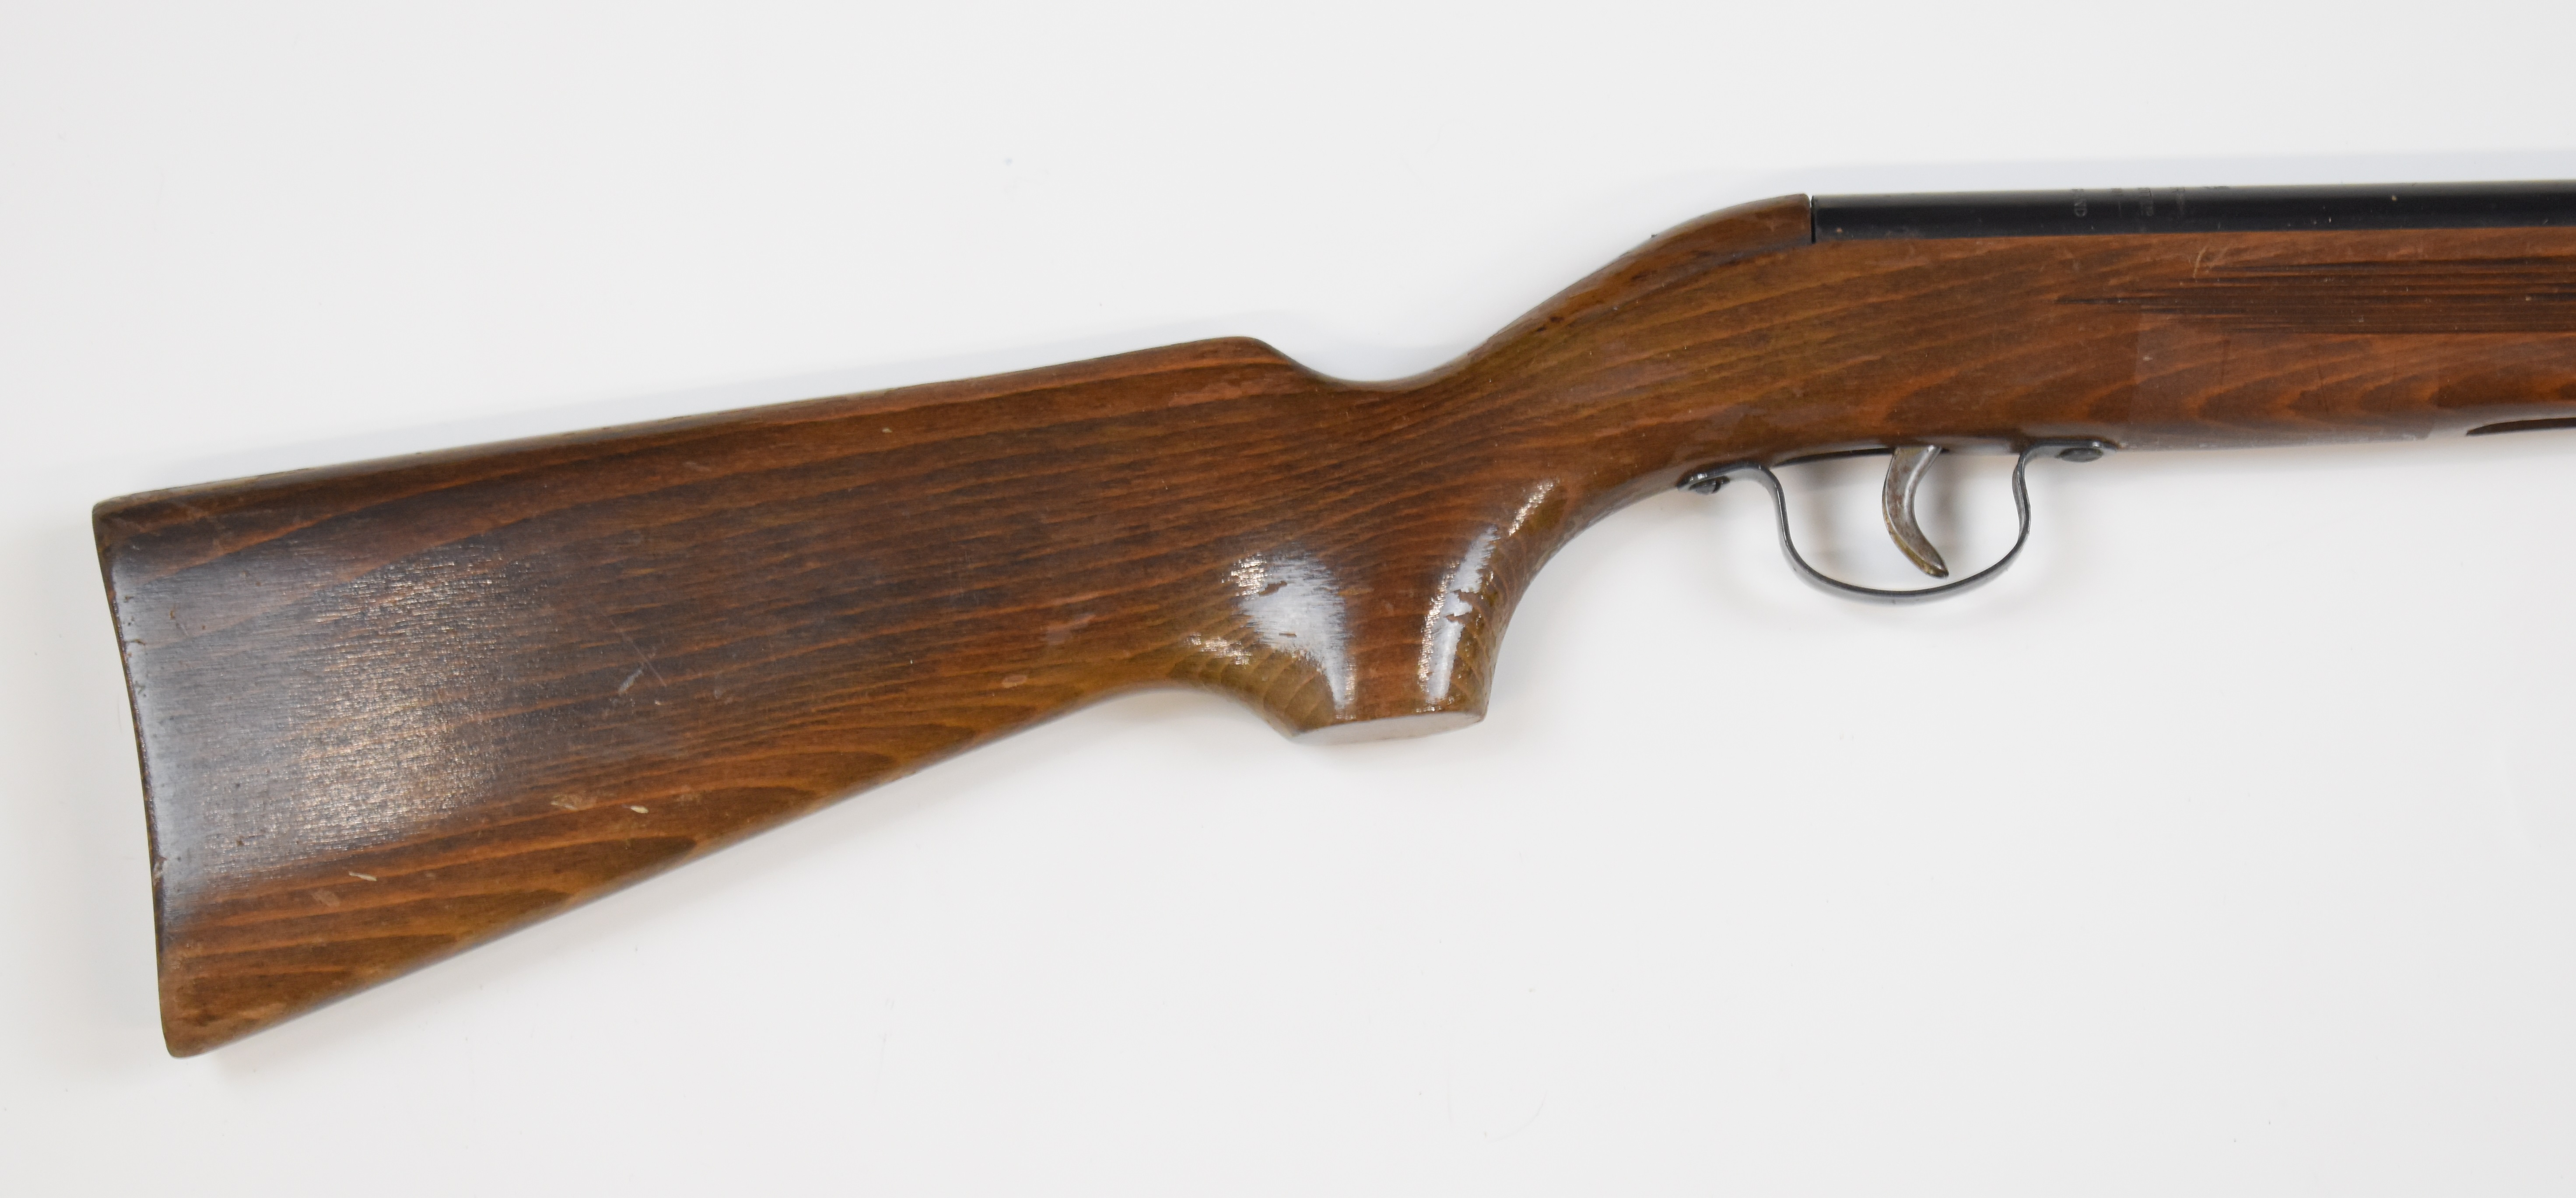 Webley Ranger .177 air rifle with semi-pistol grip and adjustable sights, NVSN, in original box. - Image 4 of 8